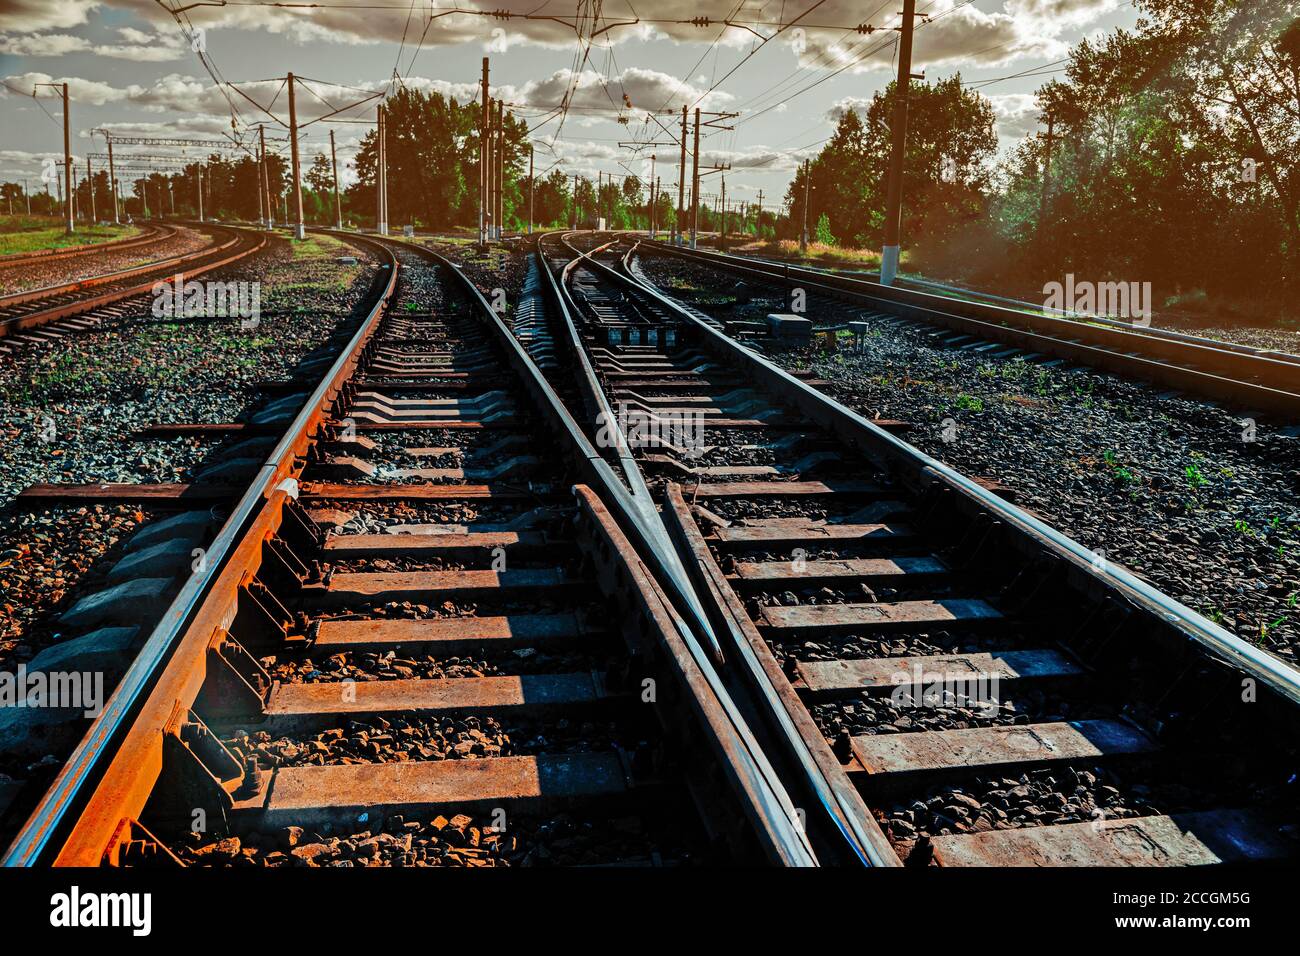 Railway intersections. Railroad leading in different directions Stock Photo